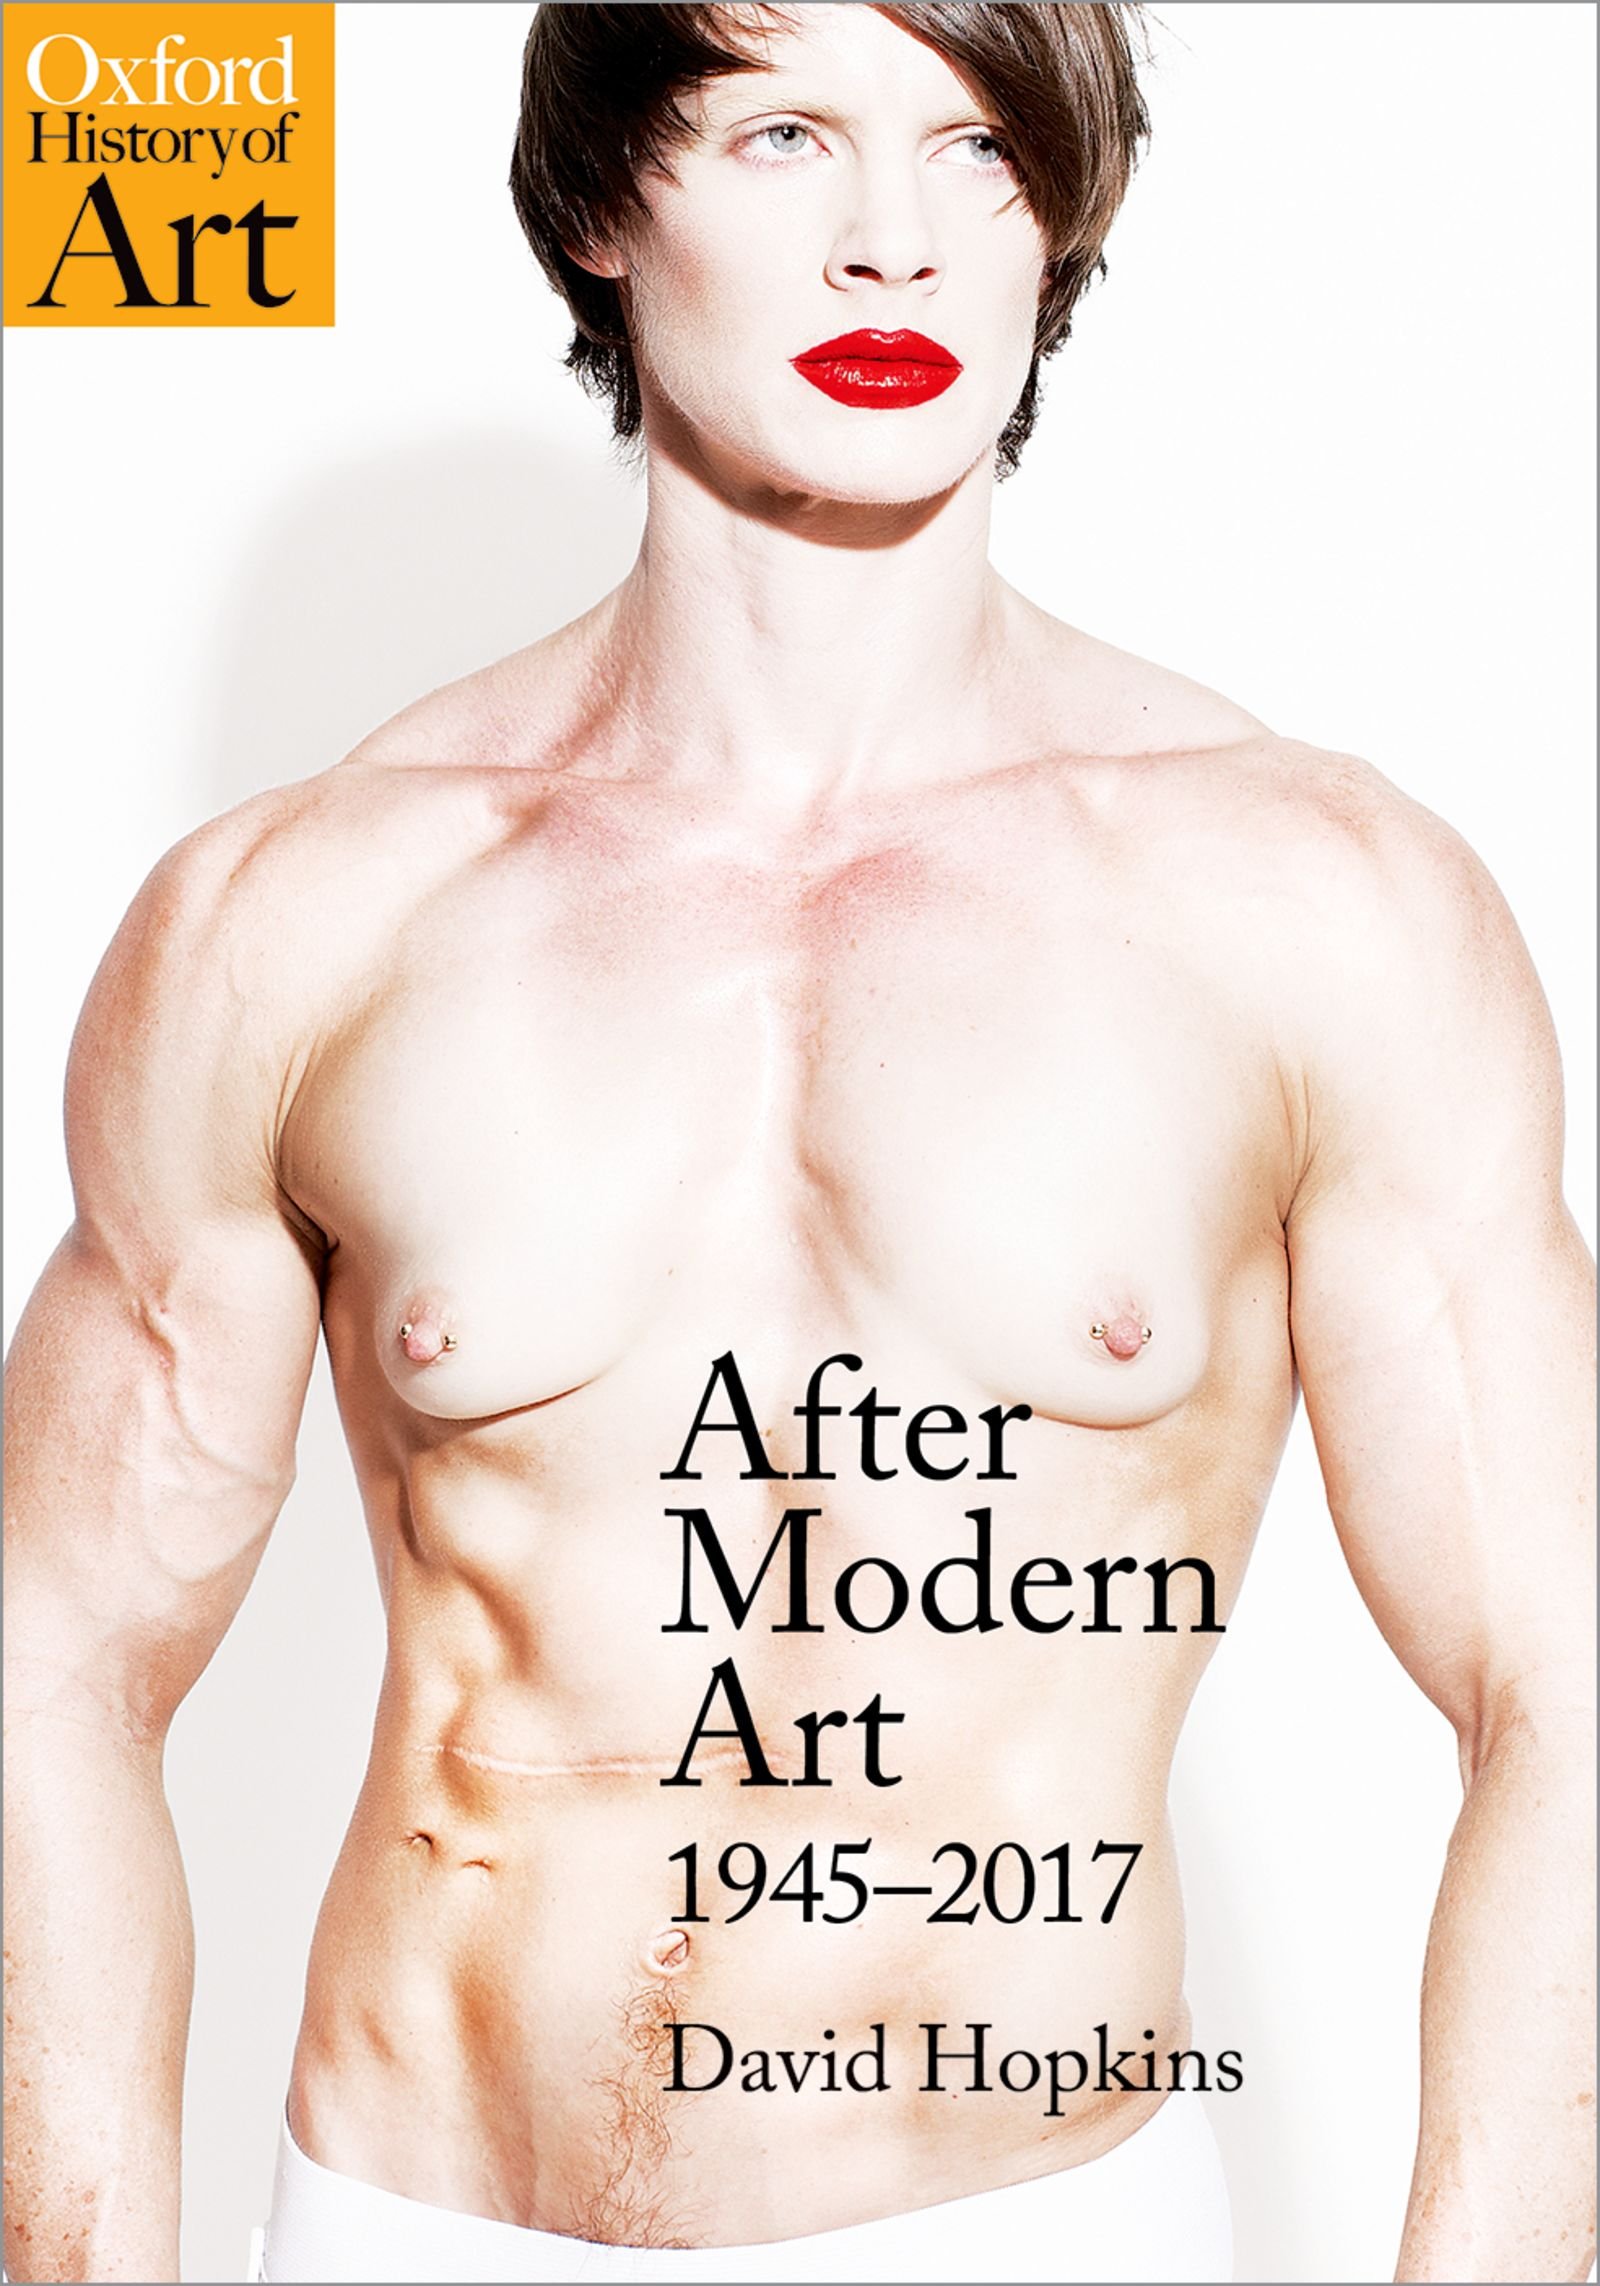 Cover of the book David Hopkins, After Modern Art: 1945–2017, Oxford University Press, 2018